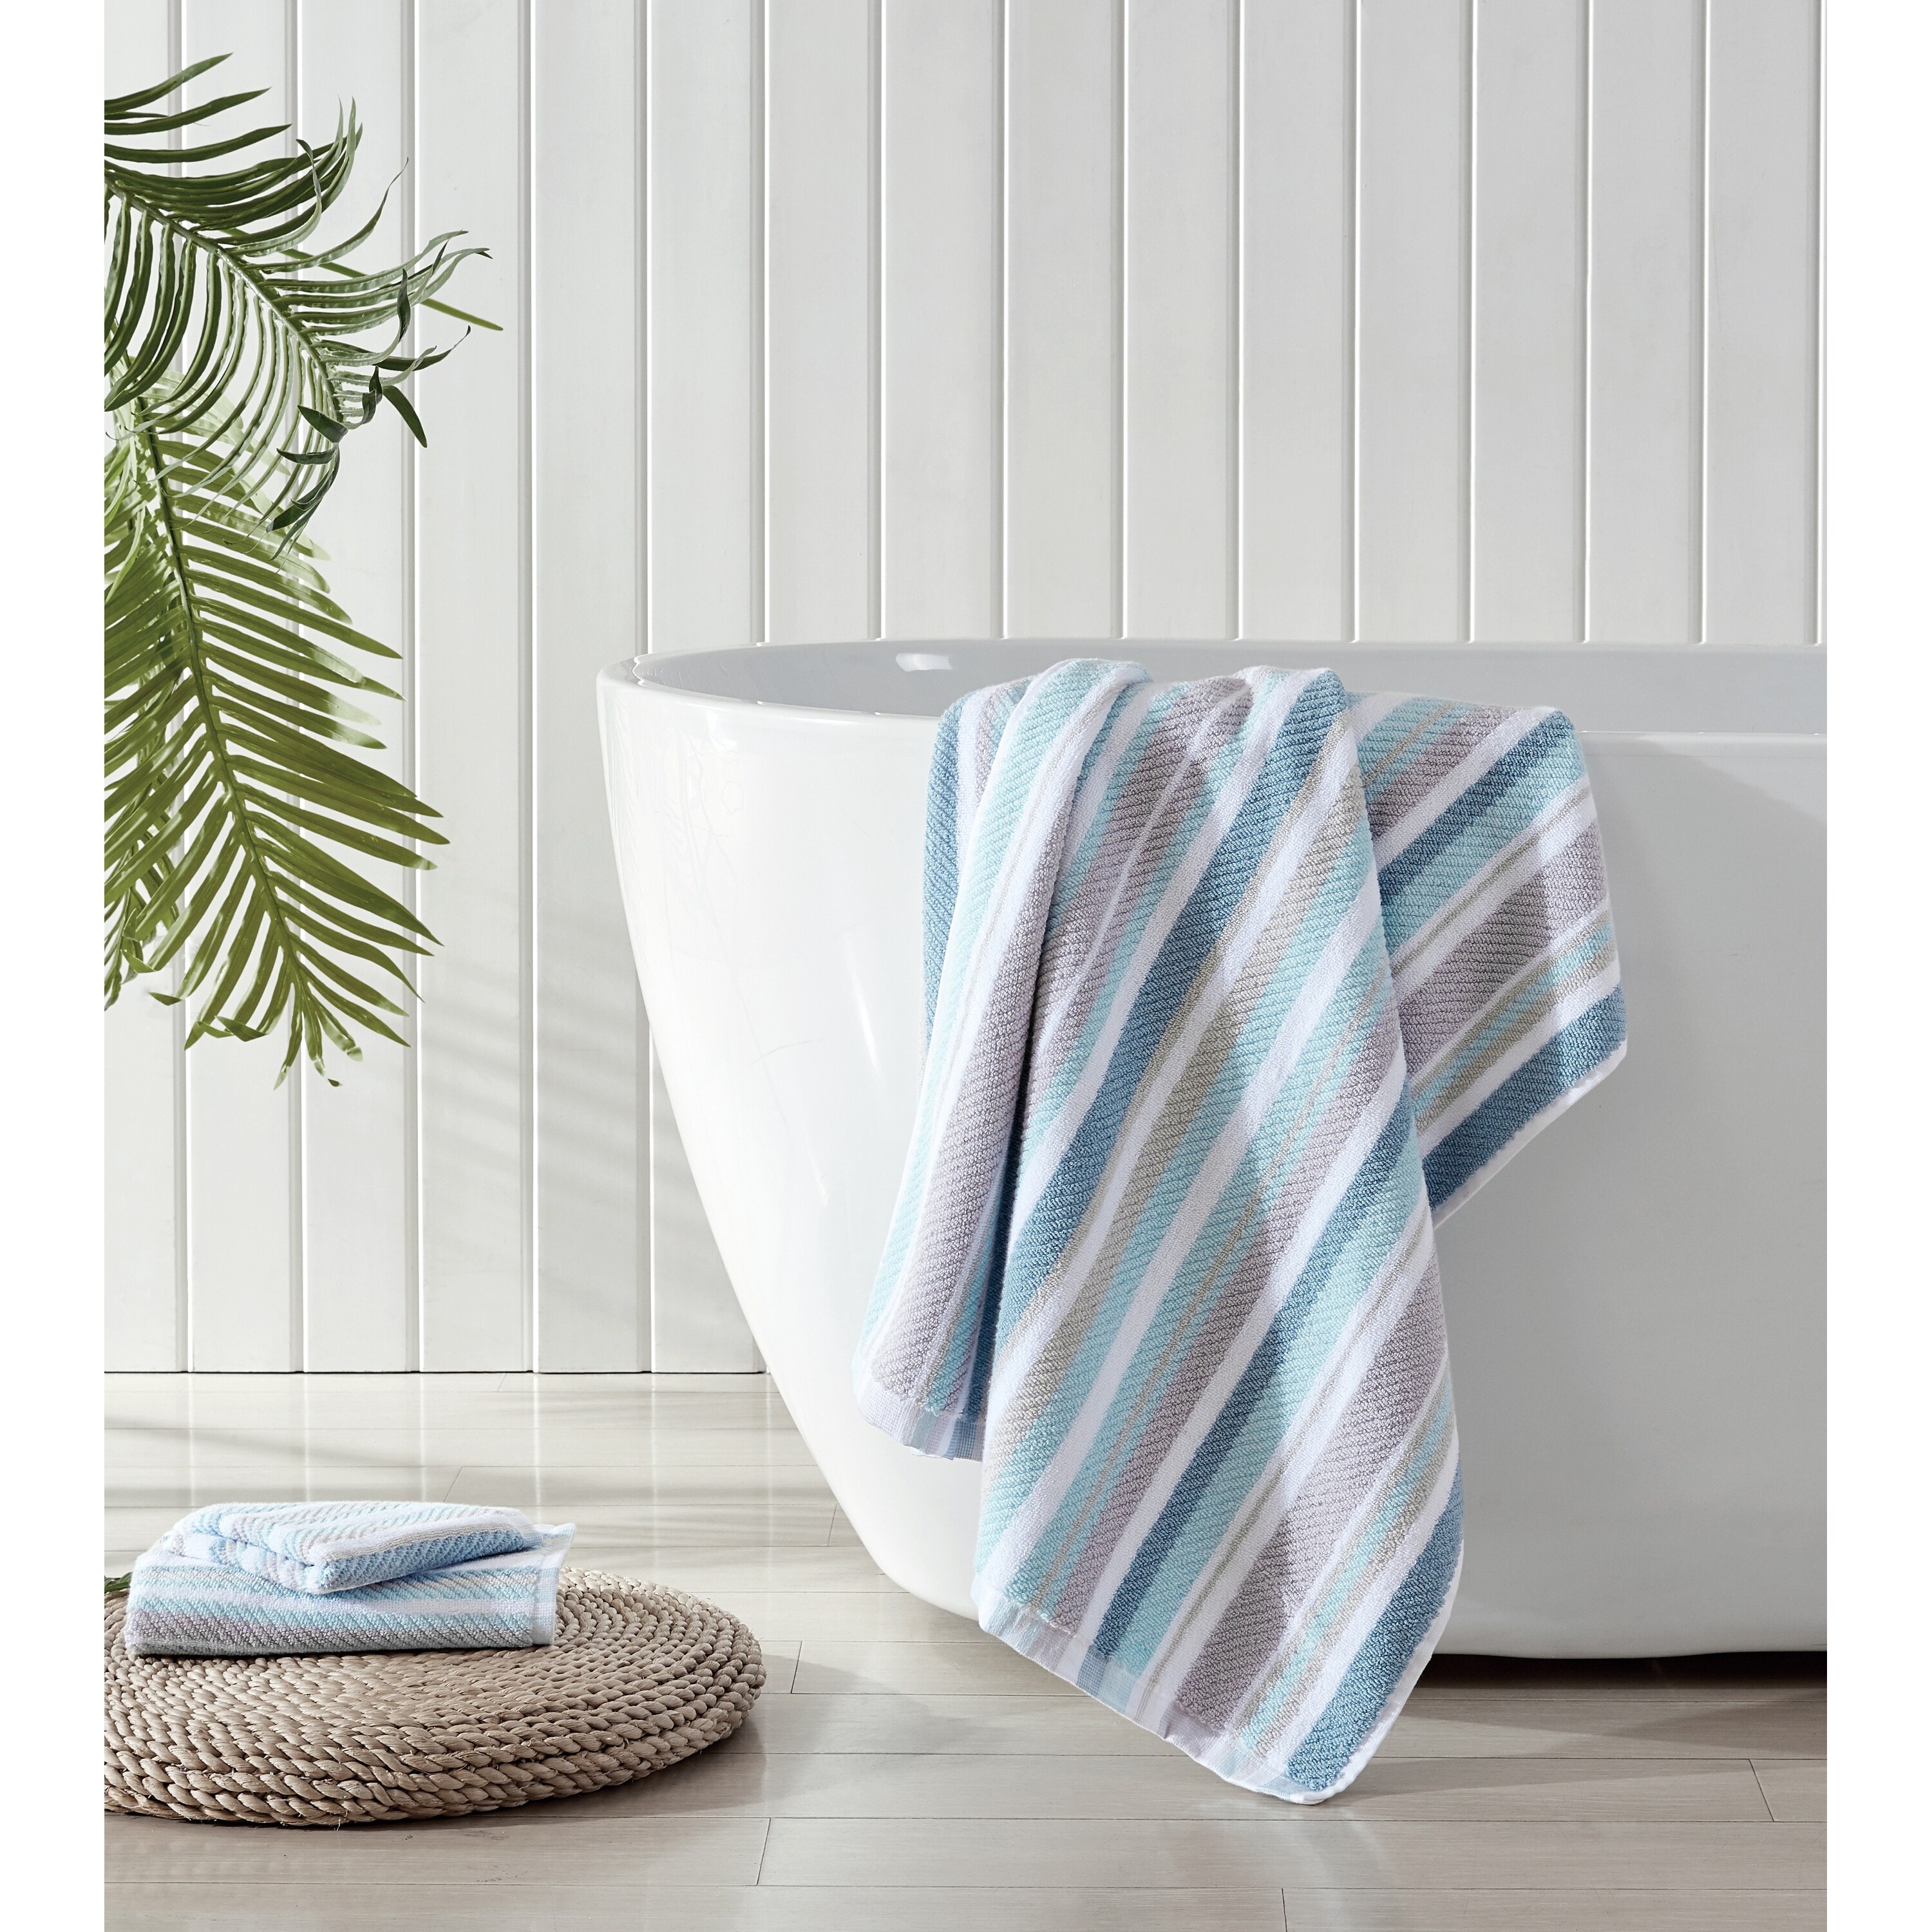 https://ak1.ostkcdn.com/images/products/is/images/direct/771ddce82a0fc68ad2bb2ff3a255932e3e2fa3d1/Tommy-Bahama-Ocean-Bay-Stripe-Cotton-Blue-3-Piece-Towel-Set.jpg